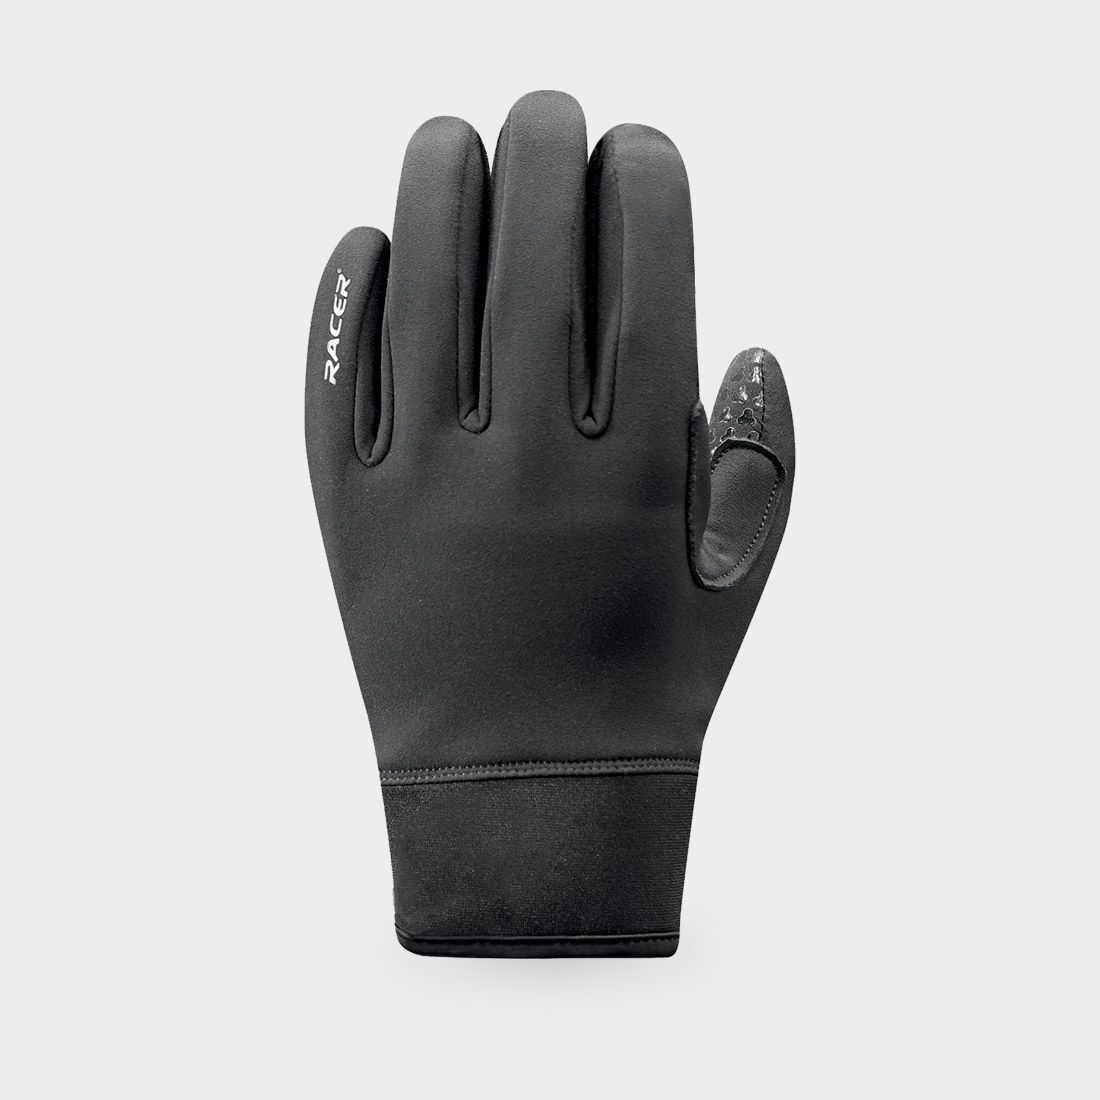 Racer Alpin - Cycling gloves